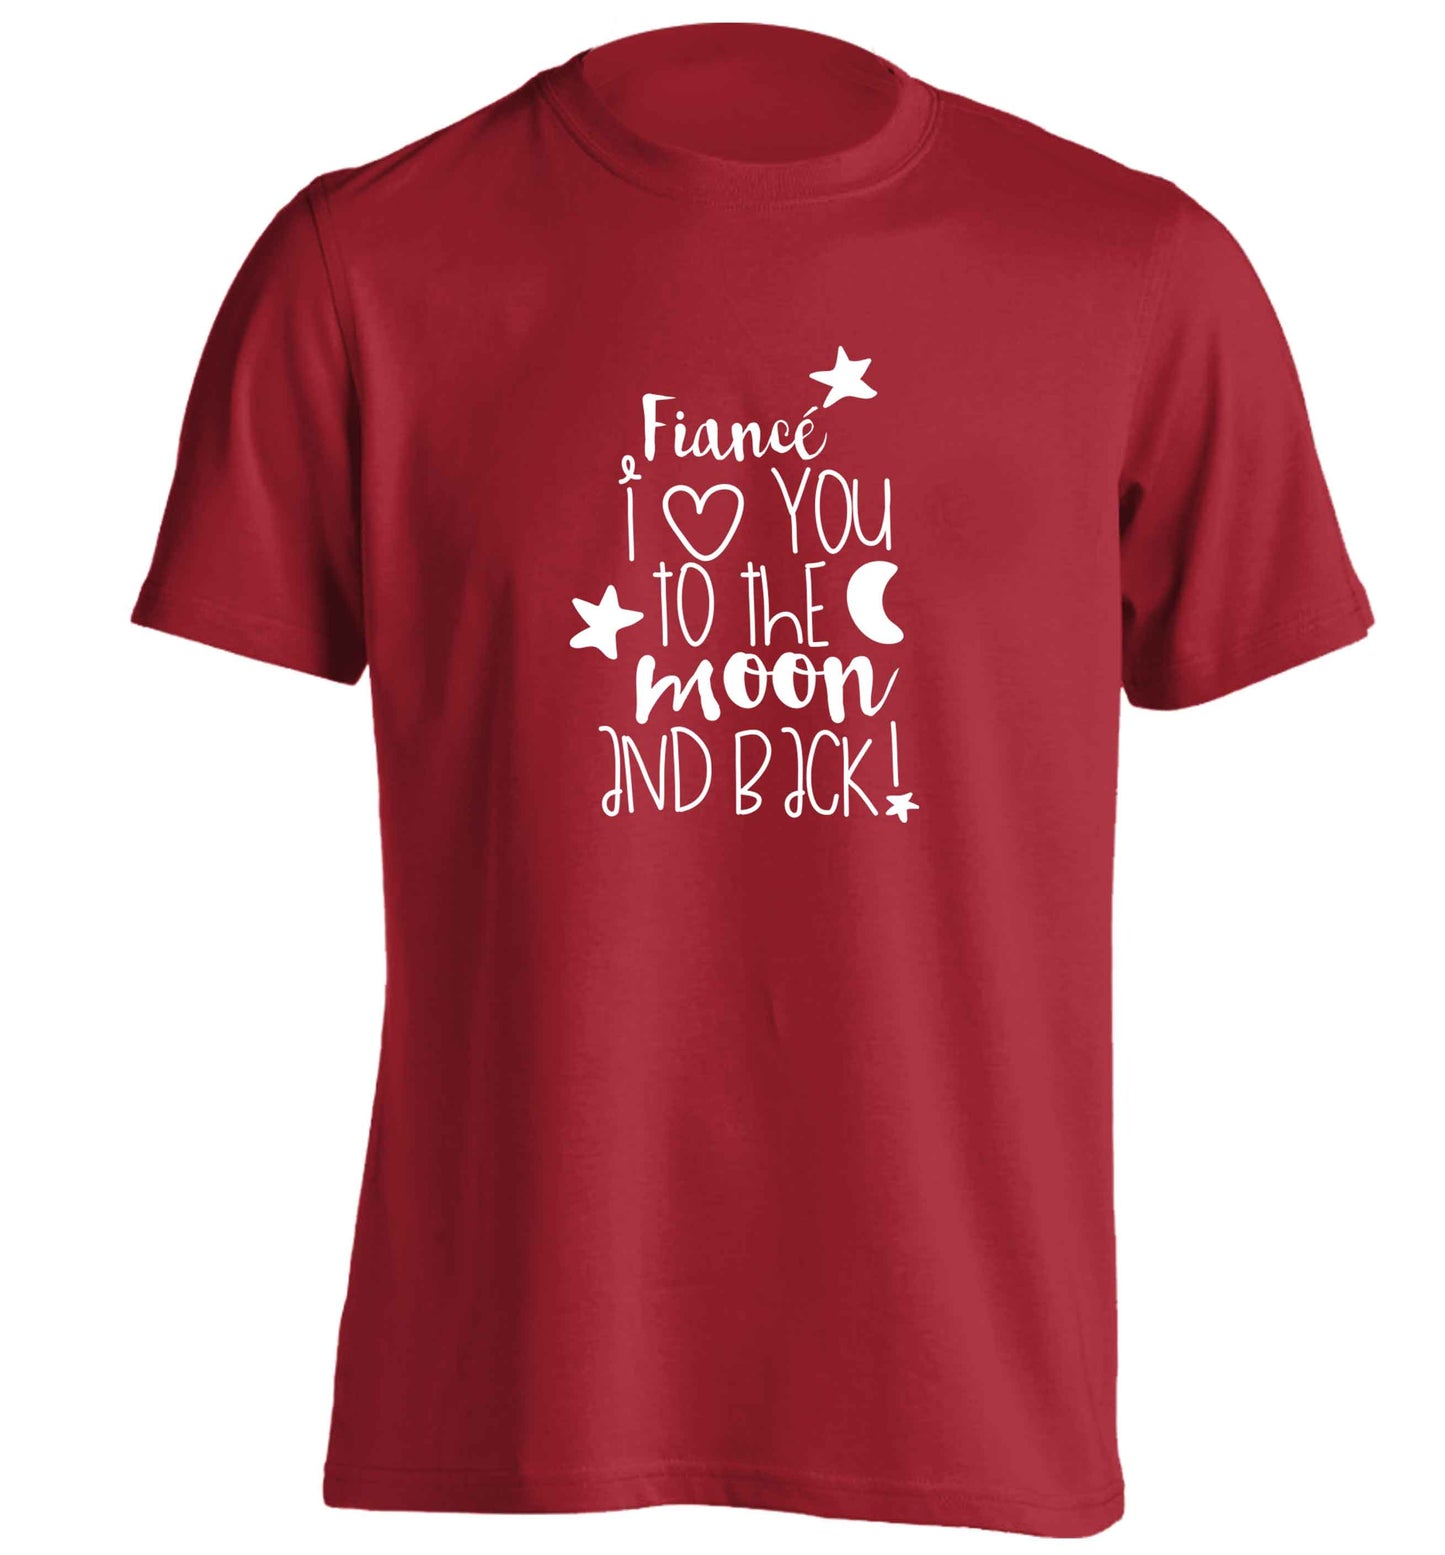 Fianc√© I love you to the moon and back adults unisex red Tshirt 2XL